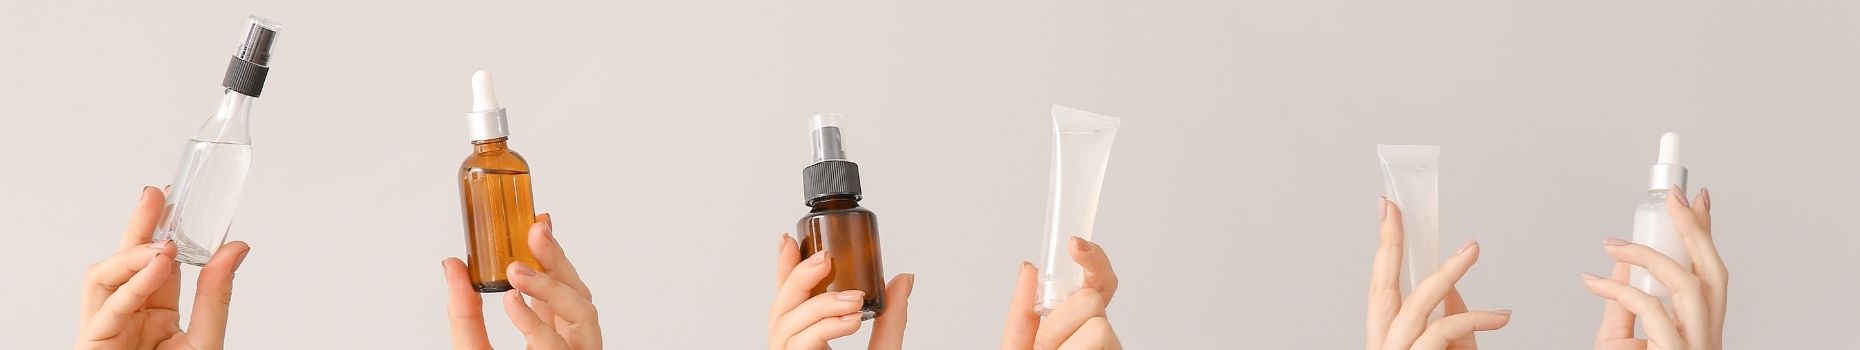 Skincare Product Bottles in Hands